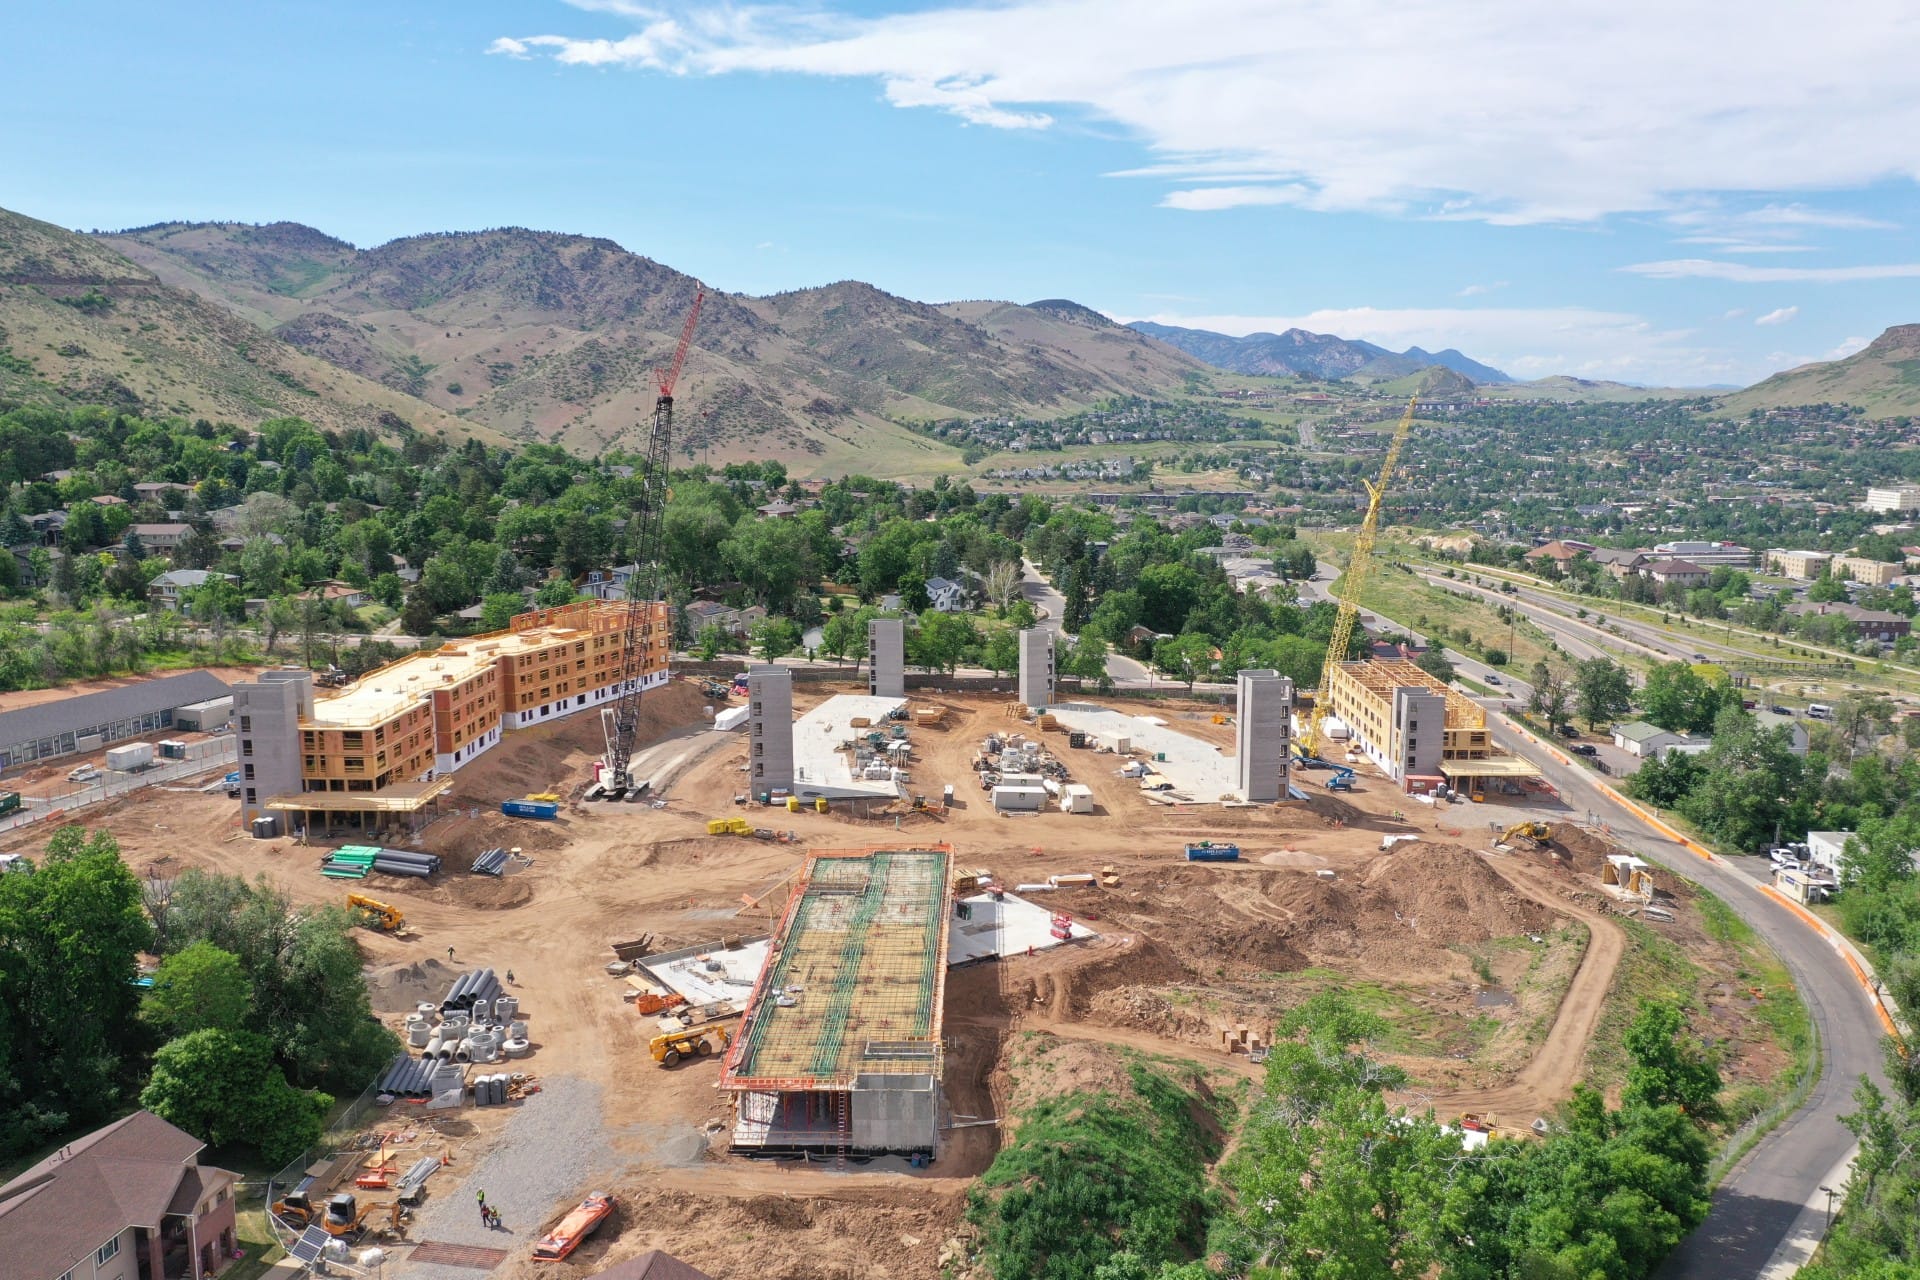 Construction underway in mines park, with several concrete elevation shaft and two cranes at buildings being framed